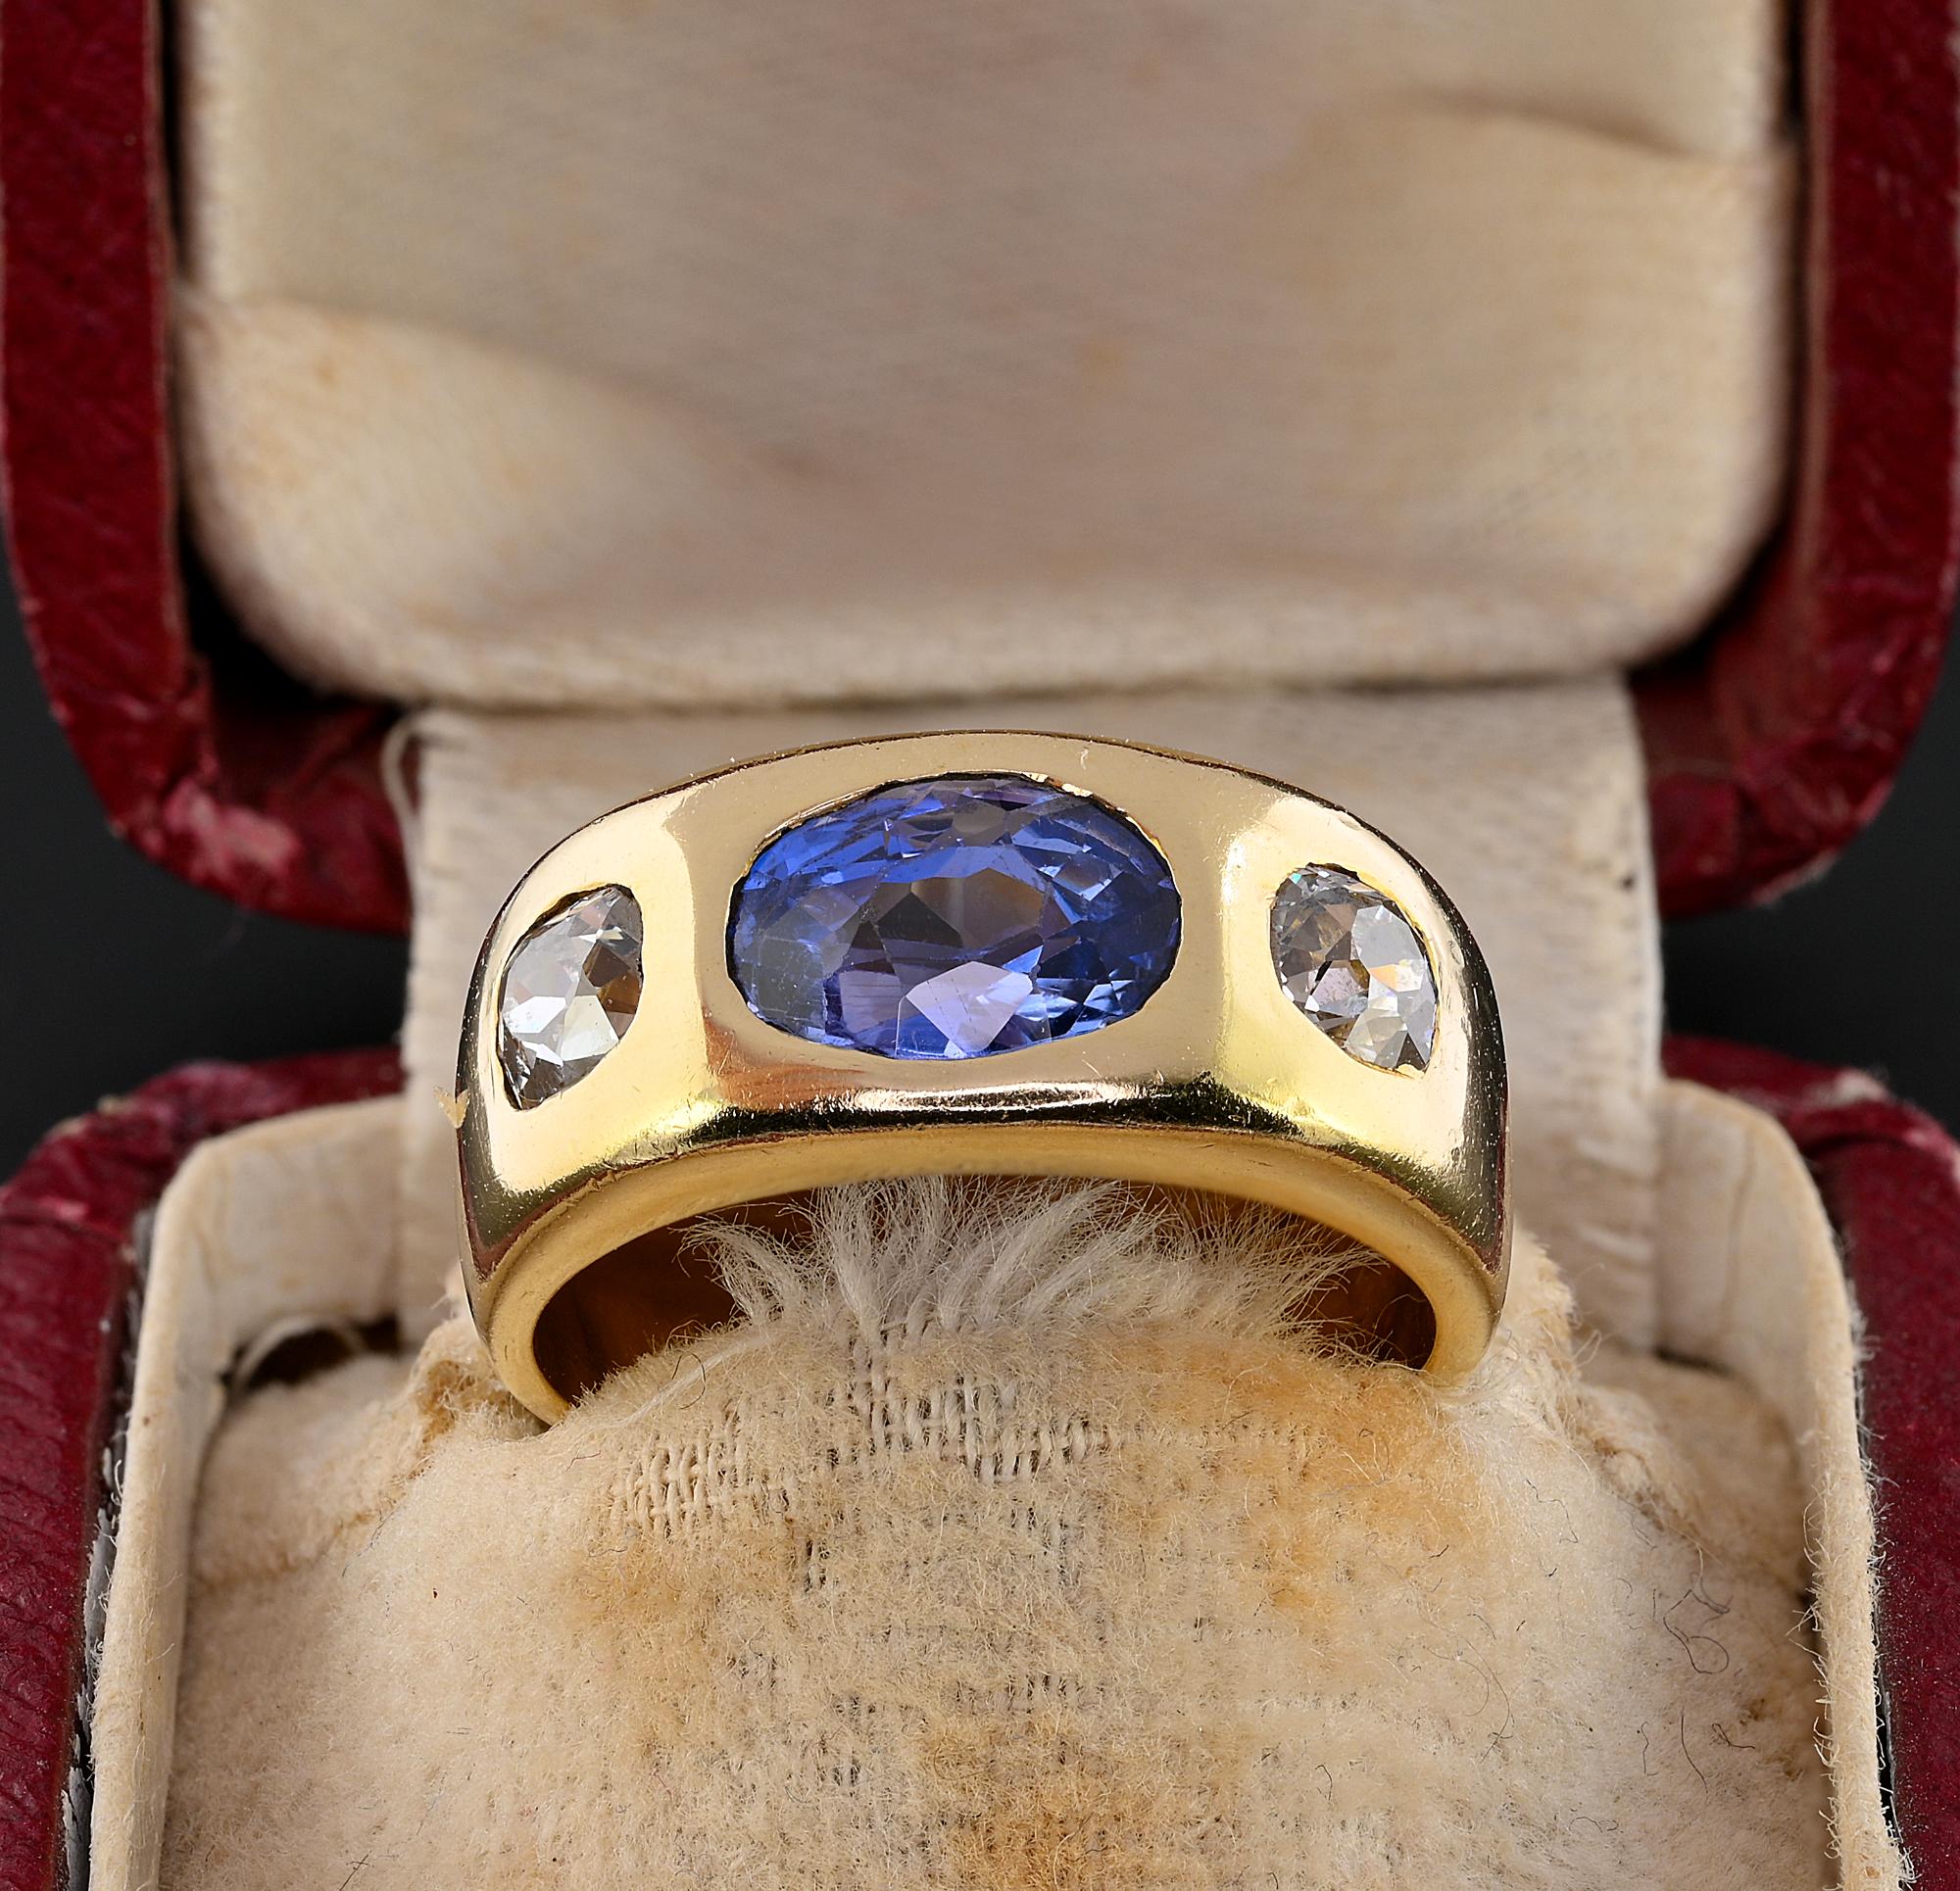 This outstanding antique 1930 circa ring has been individually hand crafted of solid 18 KT gold
It is a classy three stone ring suitable for either sex, fascinating band boasting three stone facing up, Sapphire in the middle flanked by